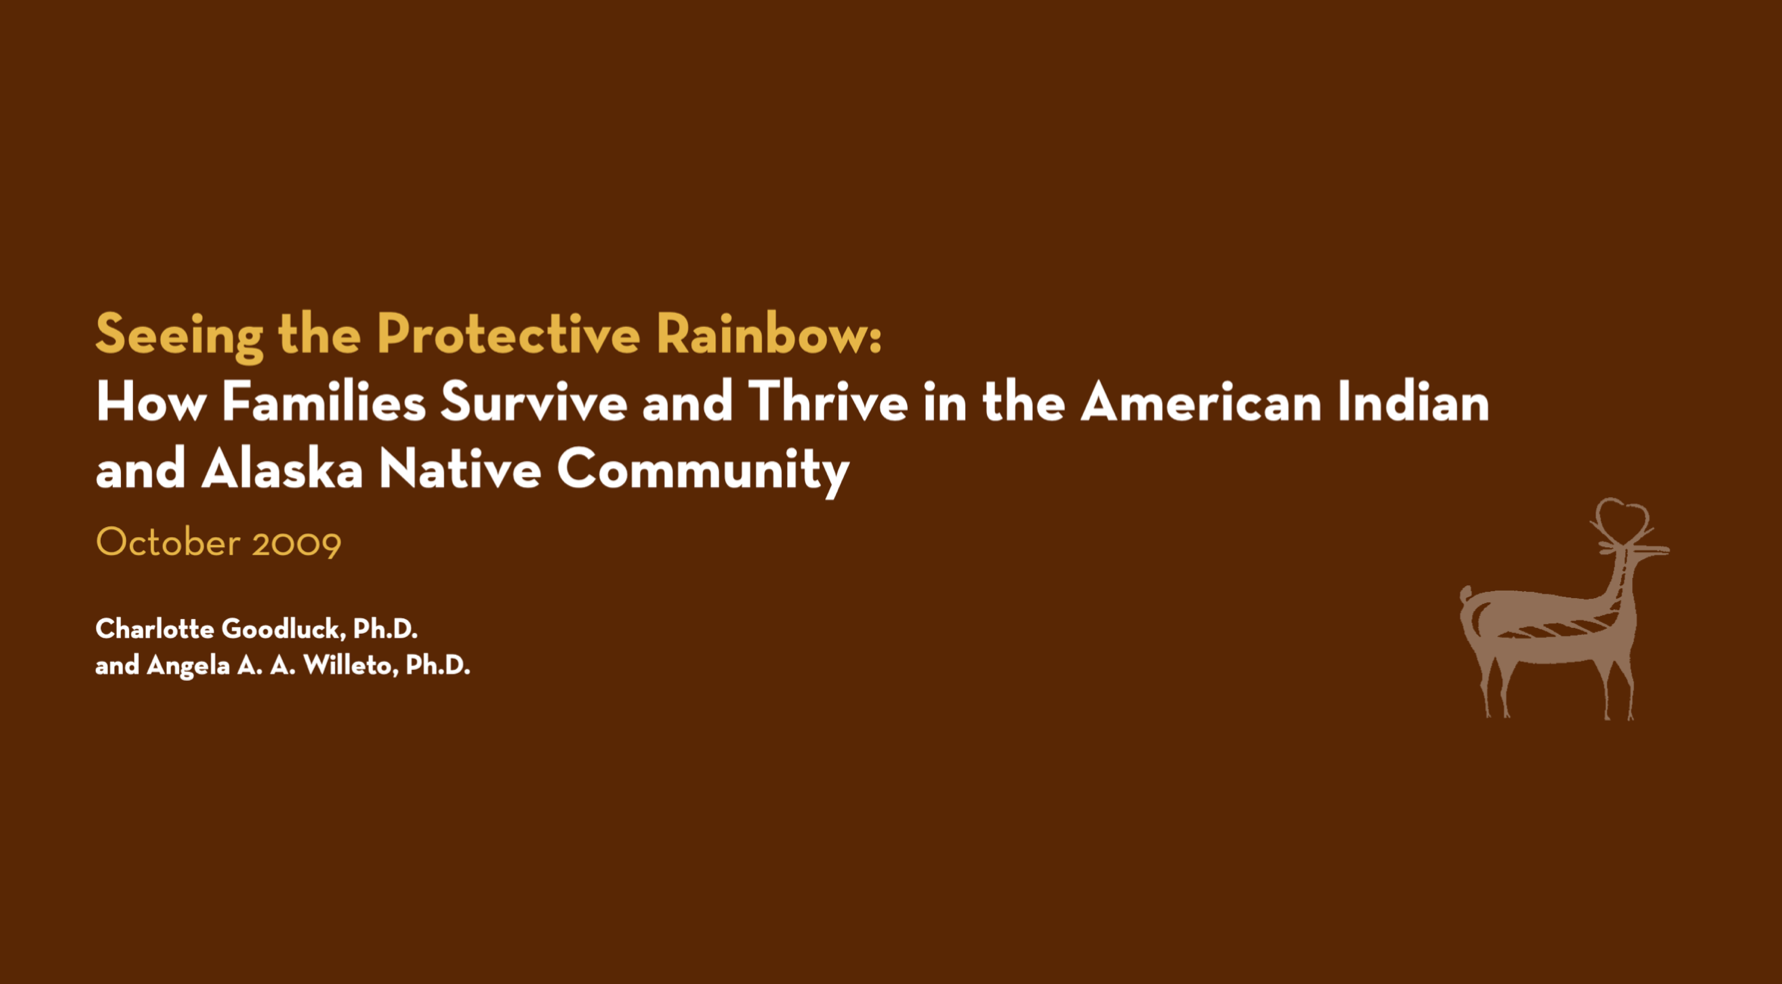 Seeing the Protective Rainbow: How Families Survive and Thrive in the American Indian and Alaska Native Community